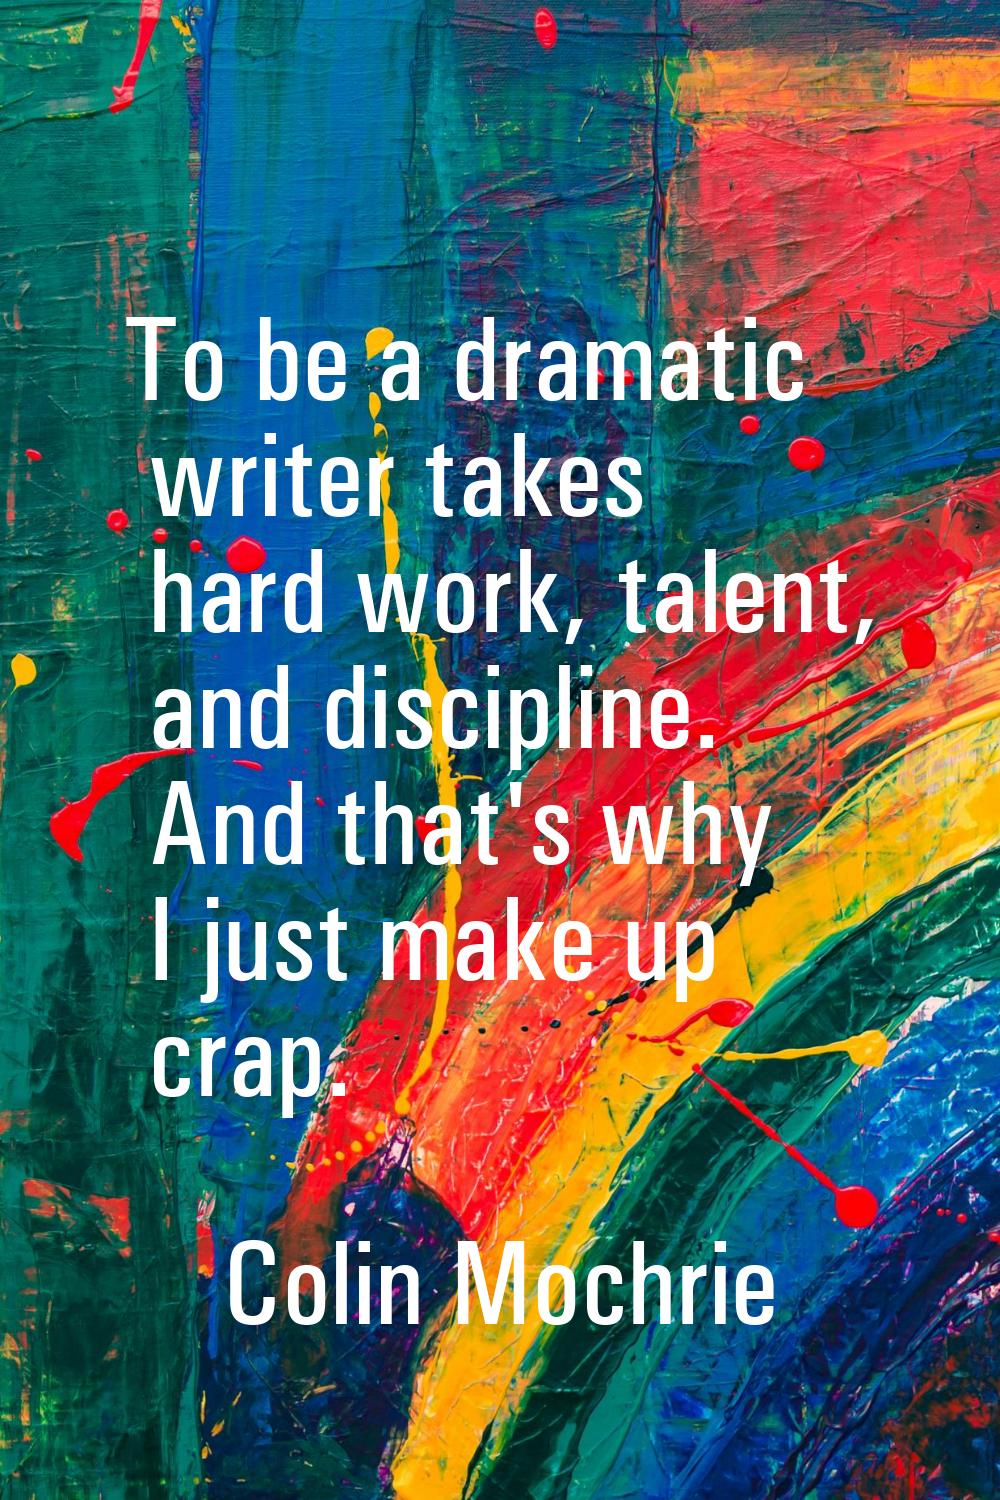 To be a dramatic writer takes hard work, talent, and discipline. And that's why I just make up crap